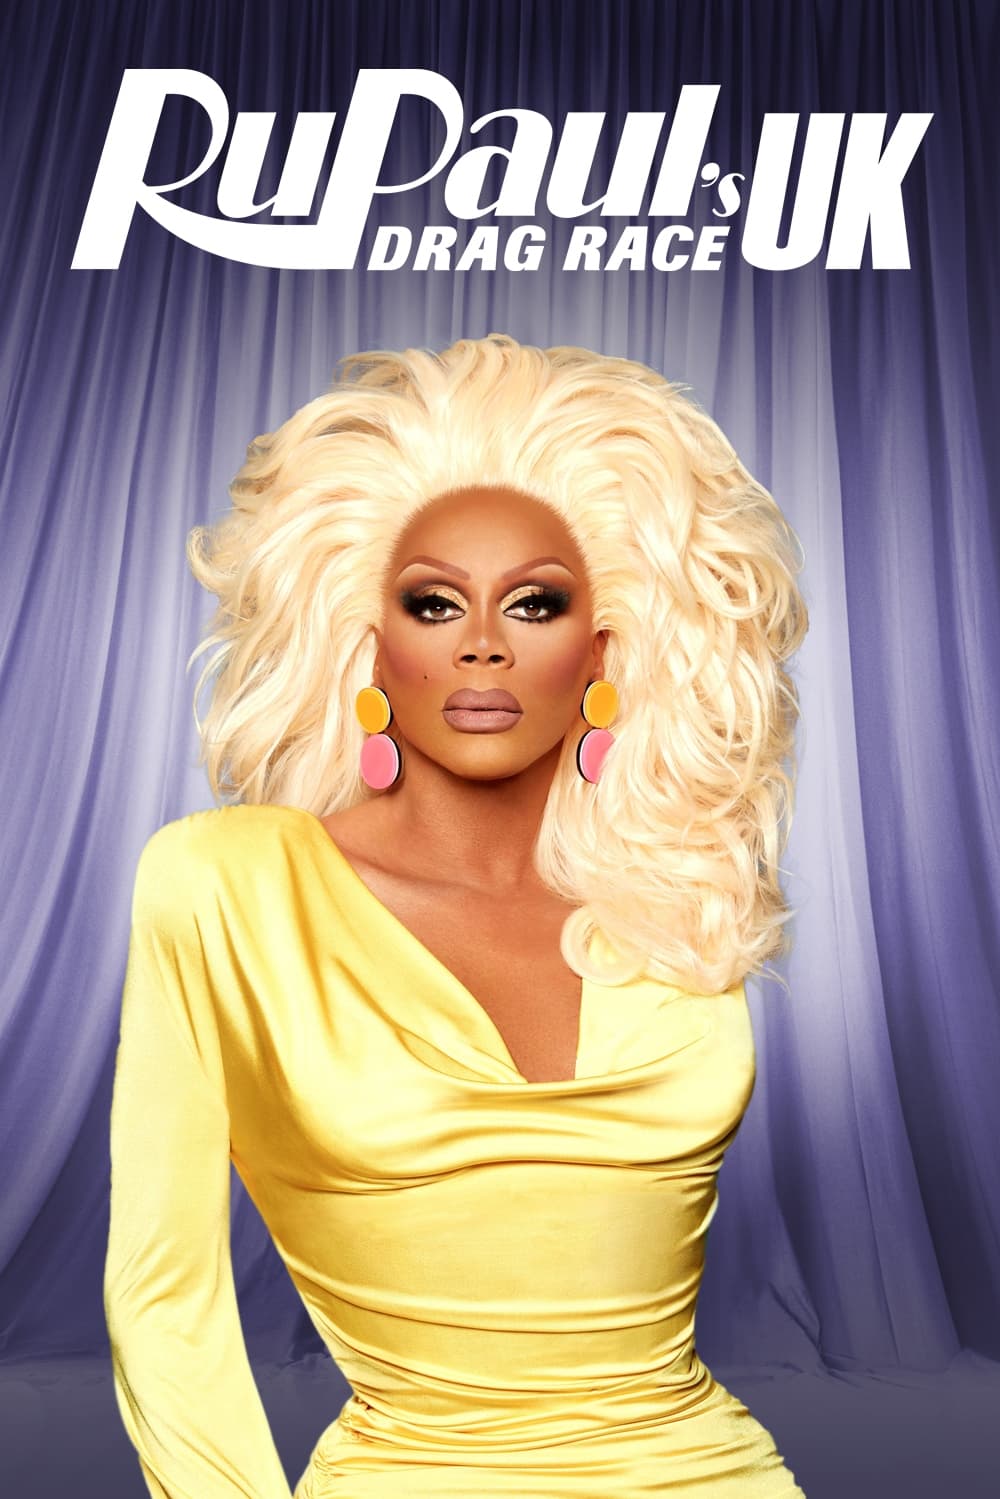 RuPaul's Drag Race UK TV Shows About Fashion